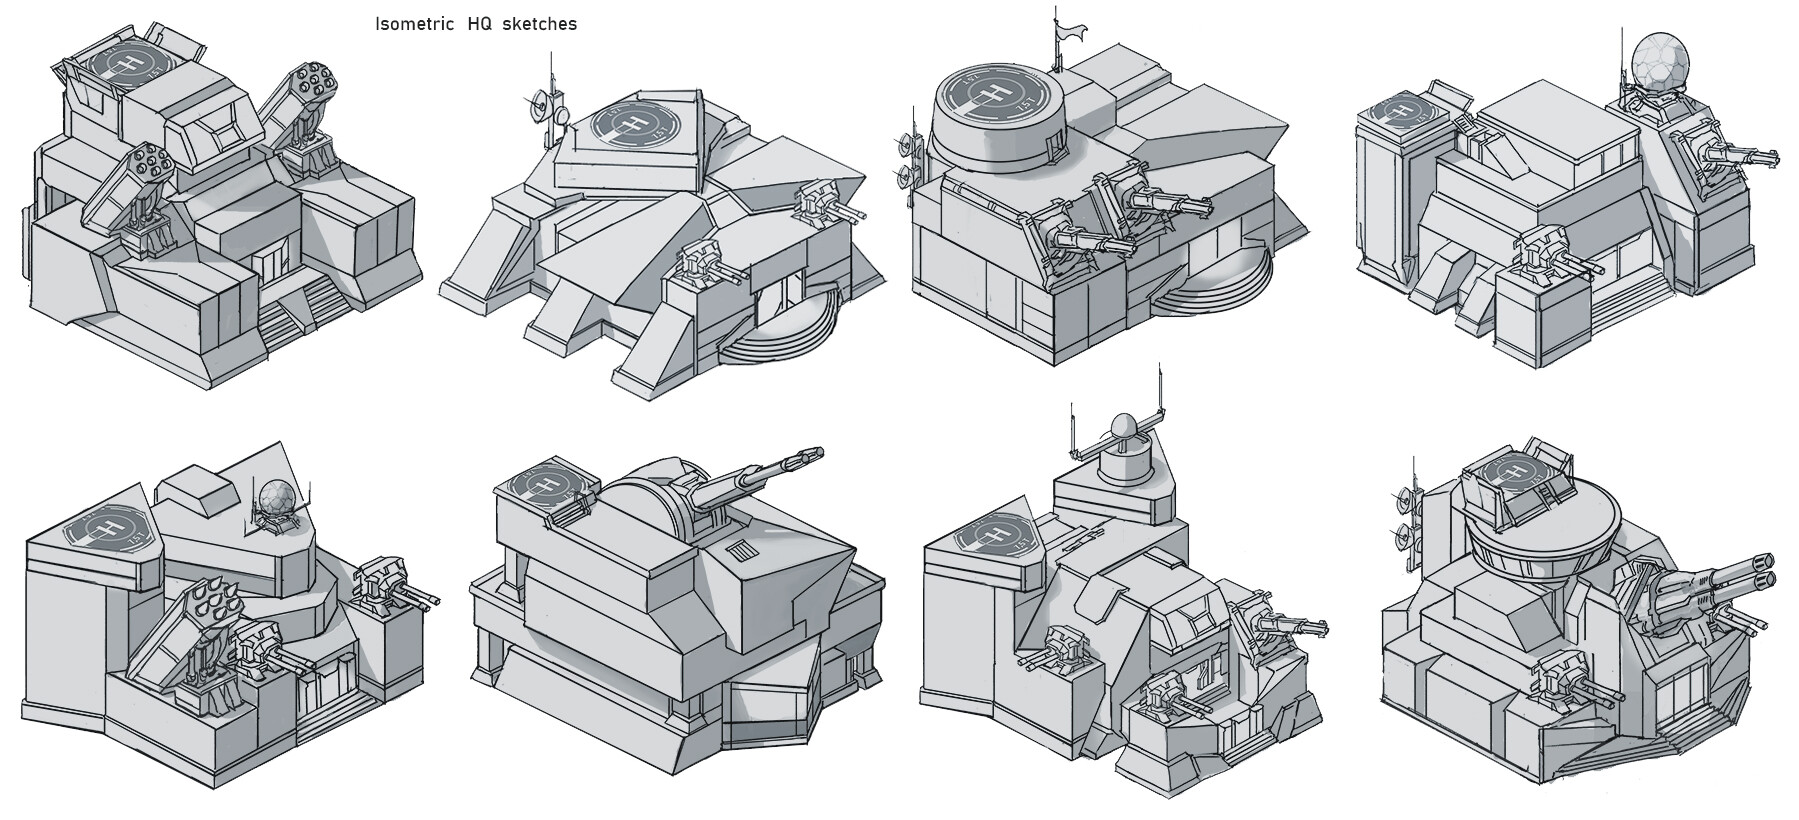 Mobile Game Isometric Building Sketches